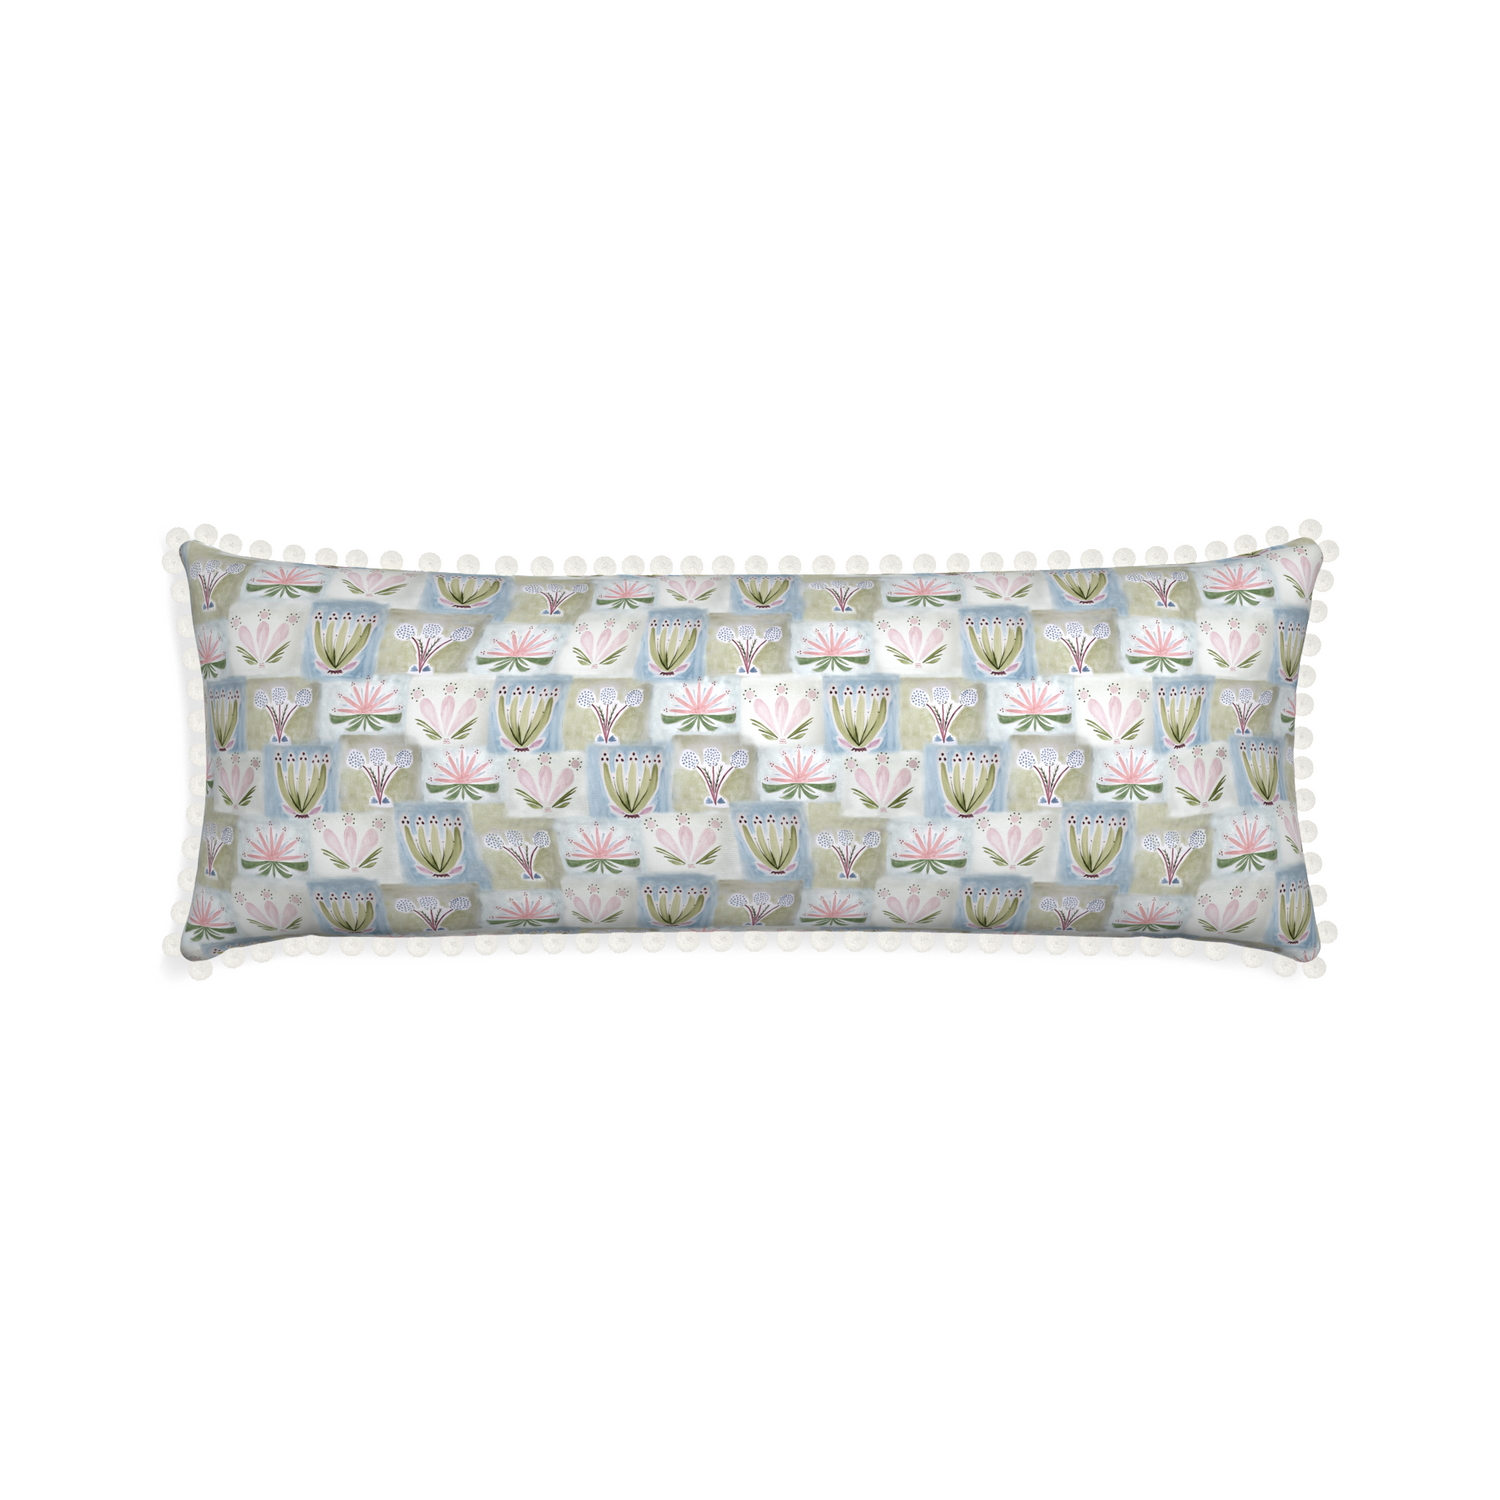 Xl-lumbar harper custom hand-painted floralpillow with snow pom pom on white background